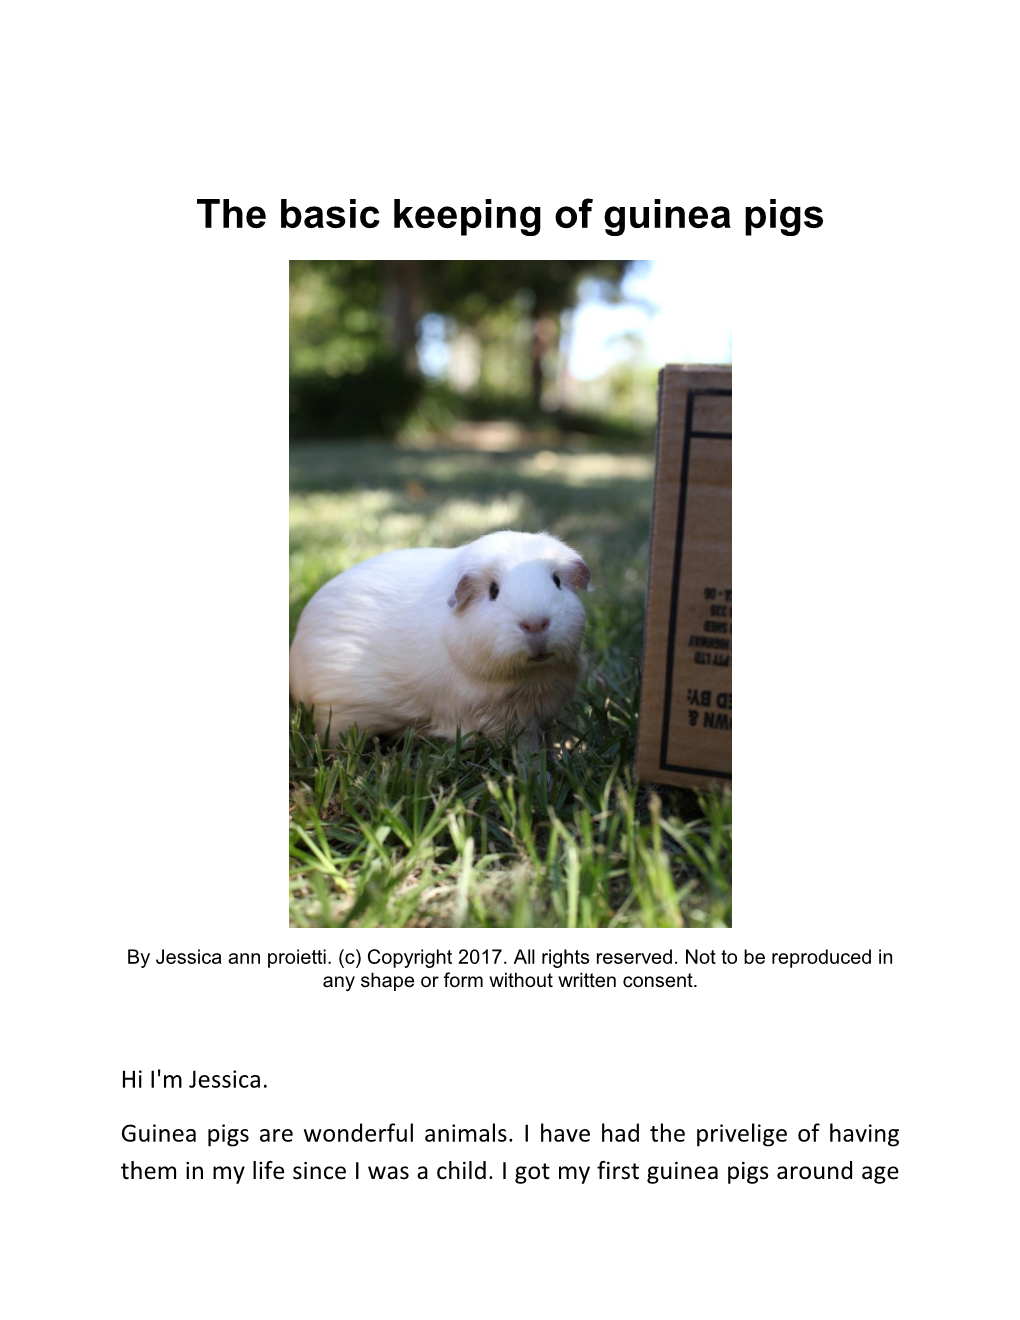 The Basic Keeping of Guinea Pigs